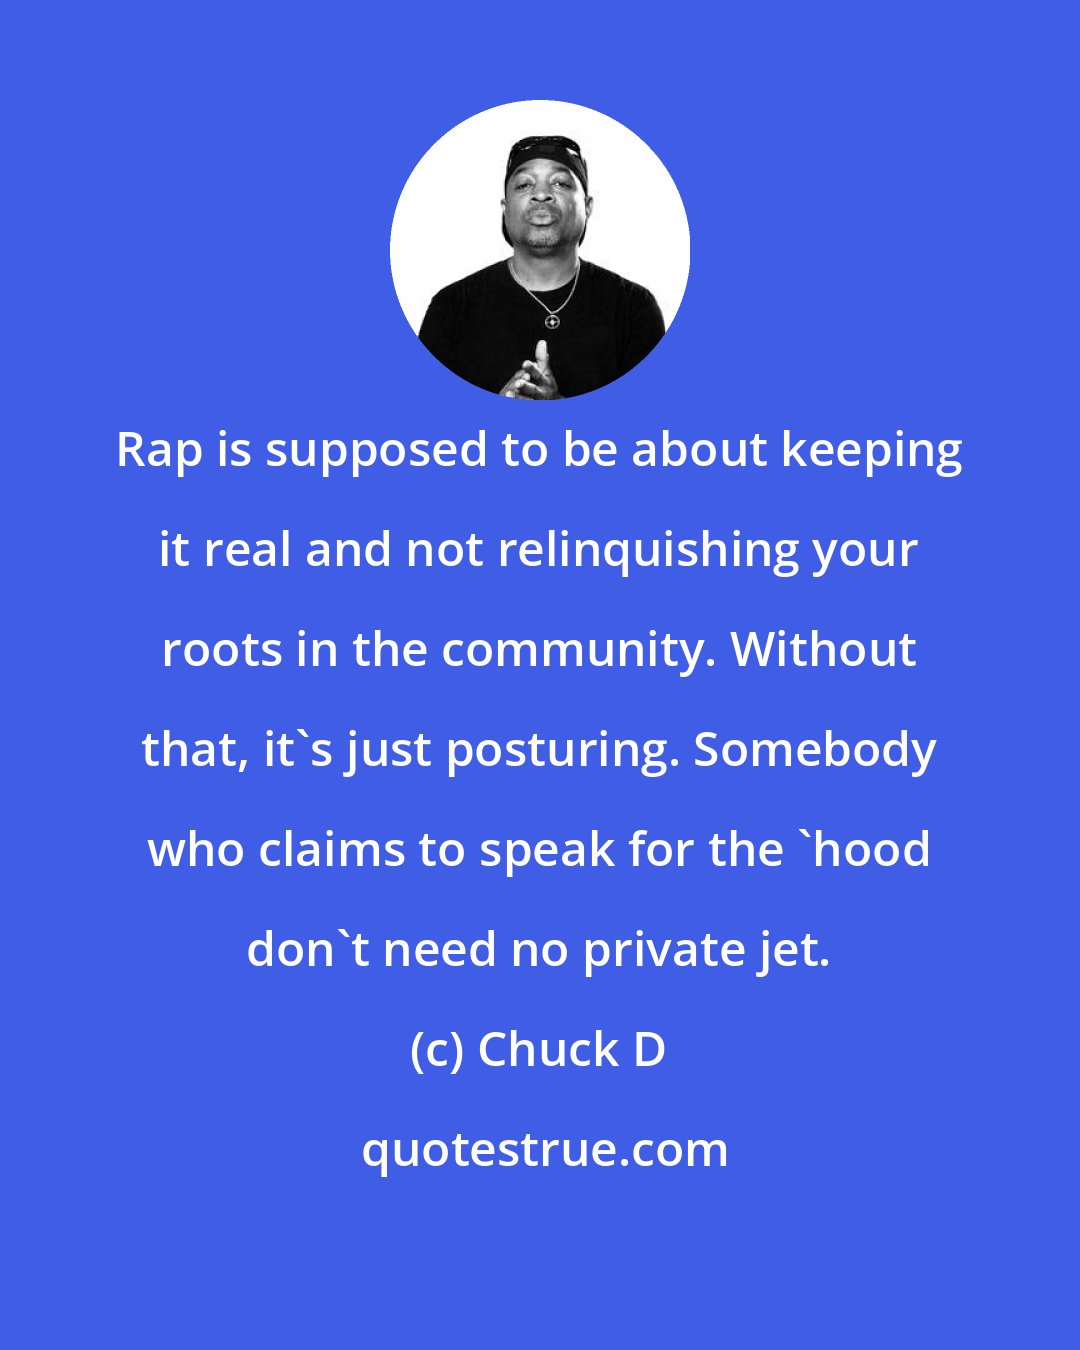 Chuck D: Rap is supposed to be about keeping it real and not relinquishing your roots in the community. Without that, it's just posturing. Somebody who claims to speak for the 'hood don't need no private jet.